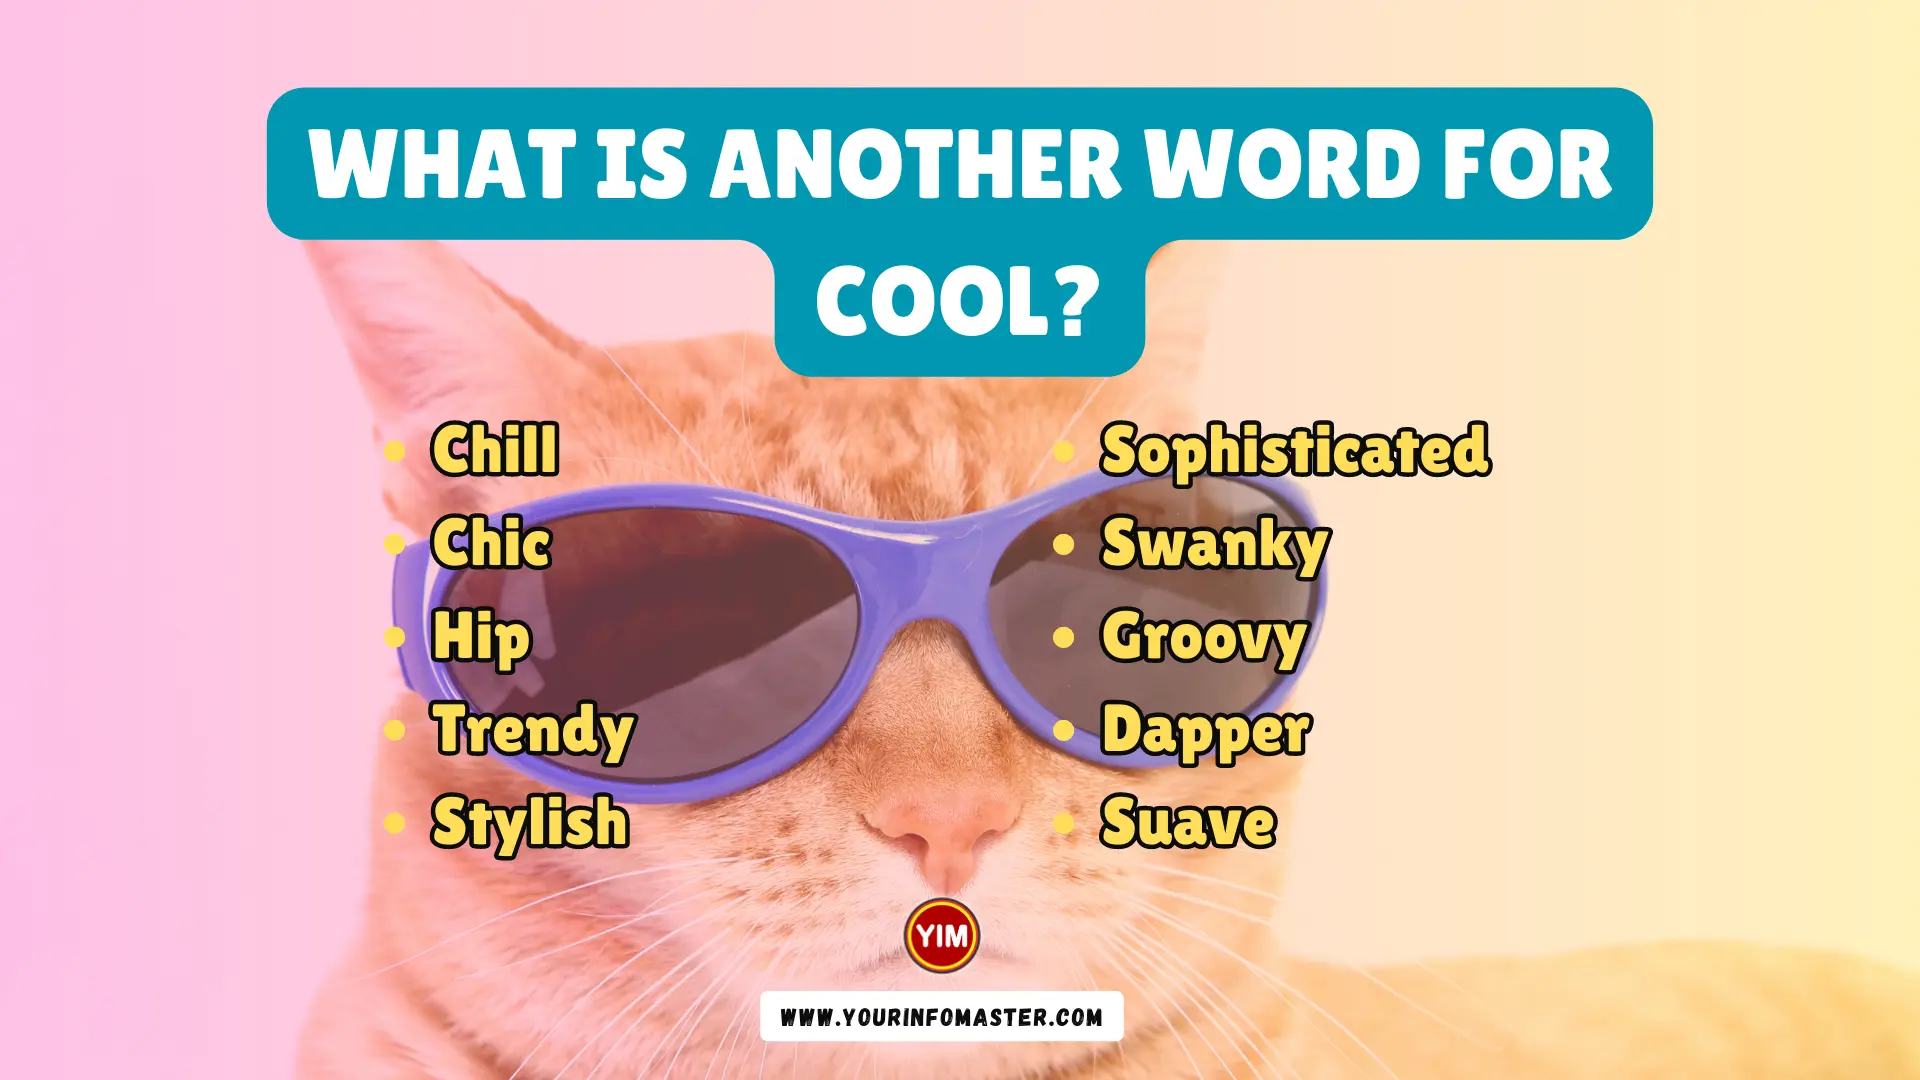 What is another word for Cool